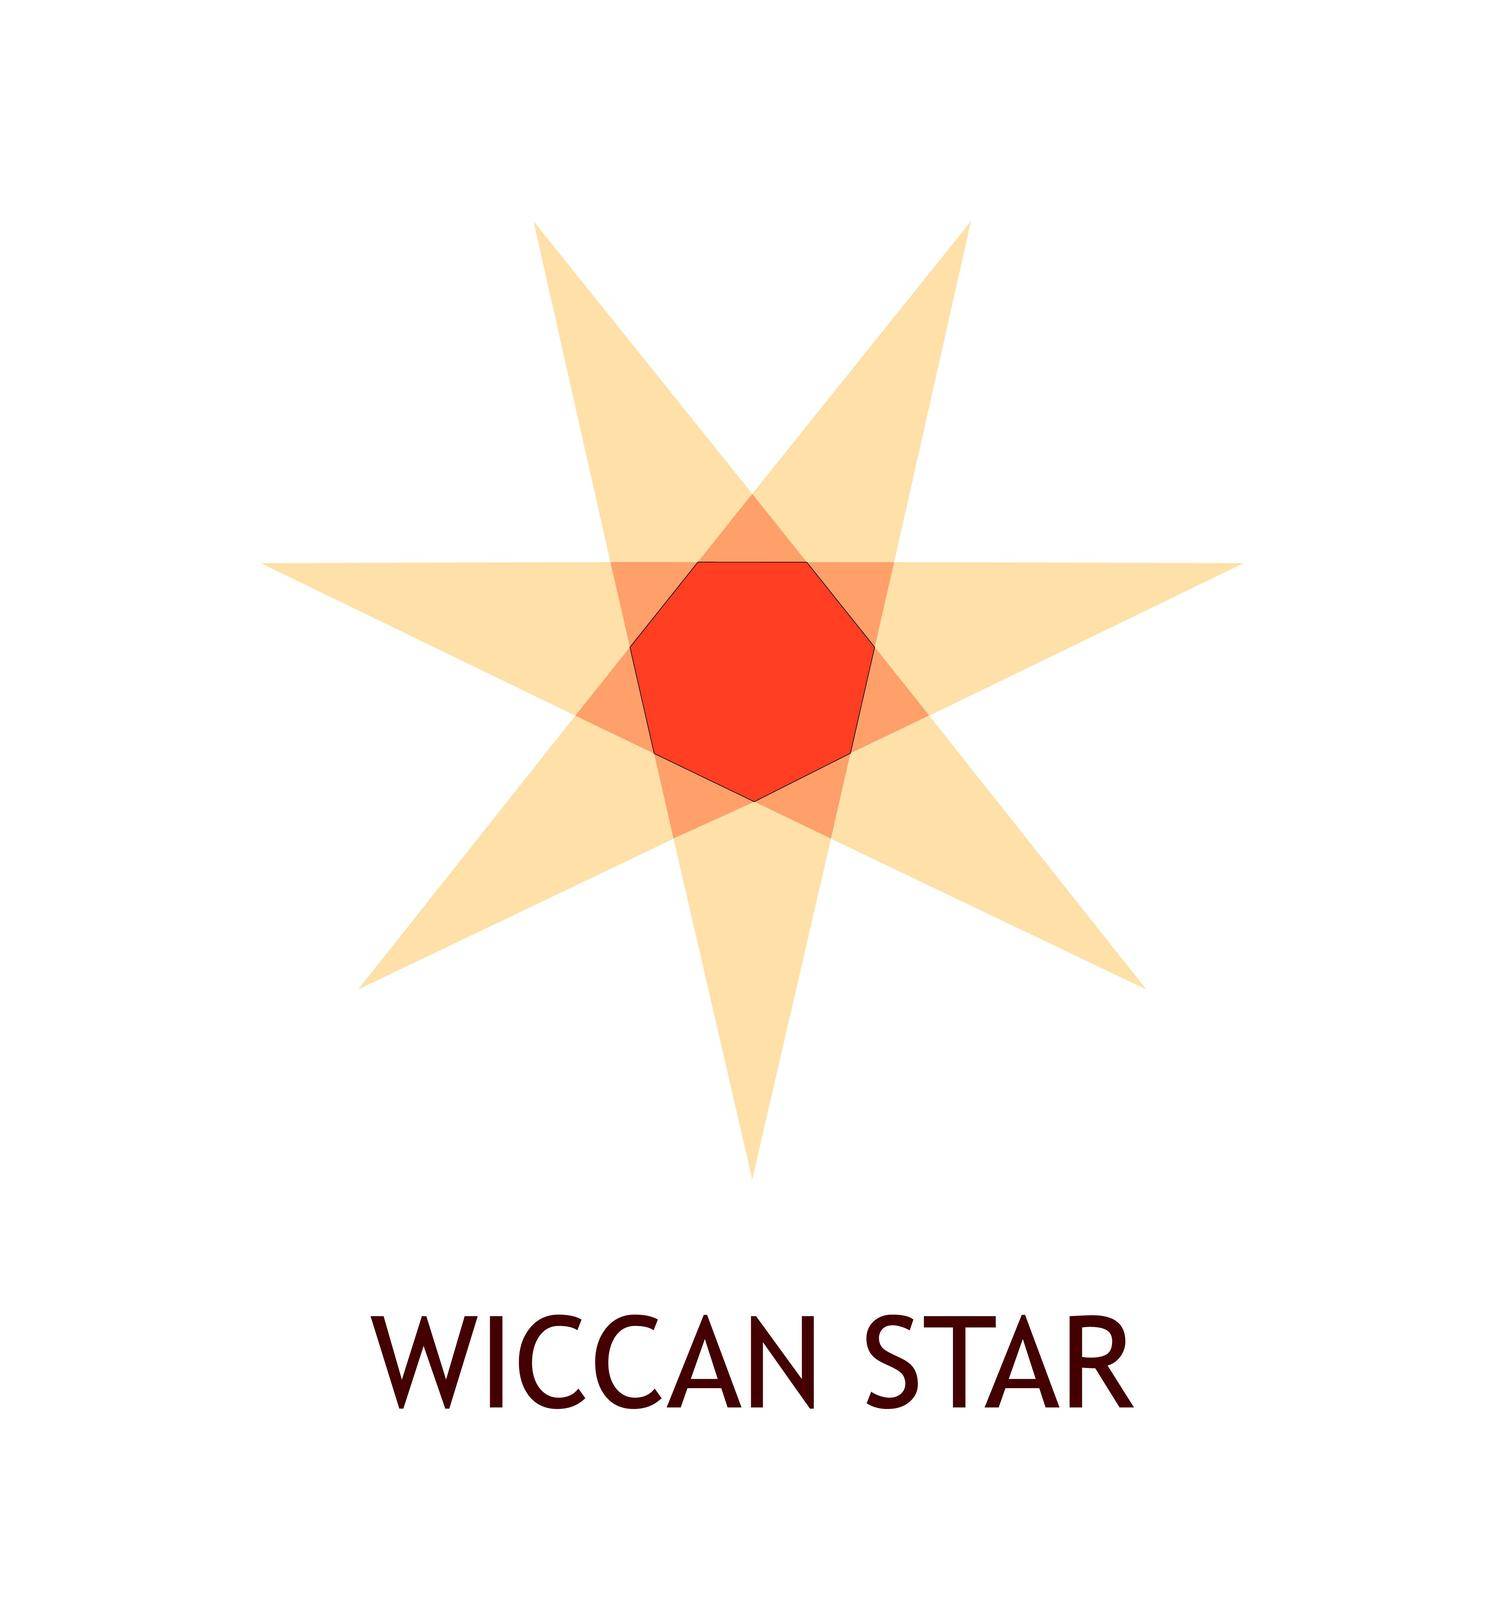 Wiccan star, pagan symbol - emblem in warm colors by macroarting